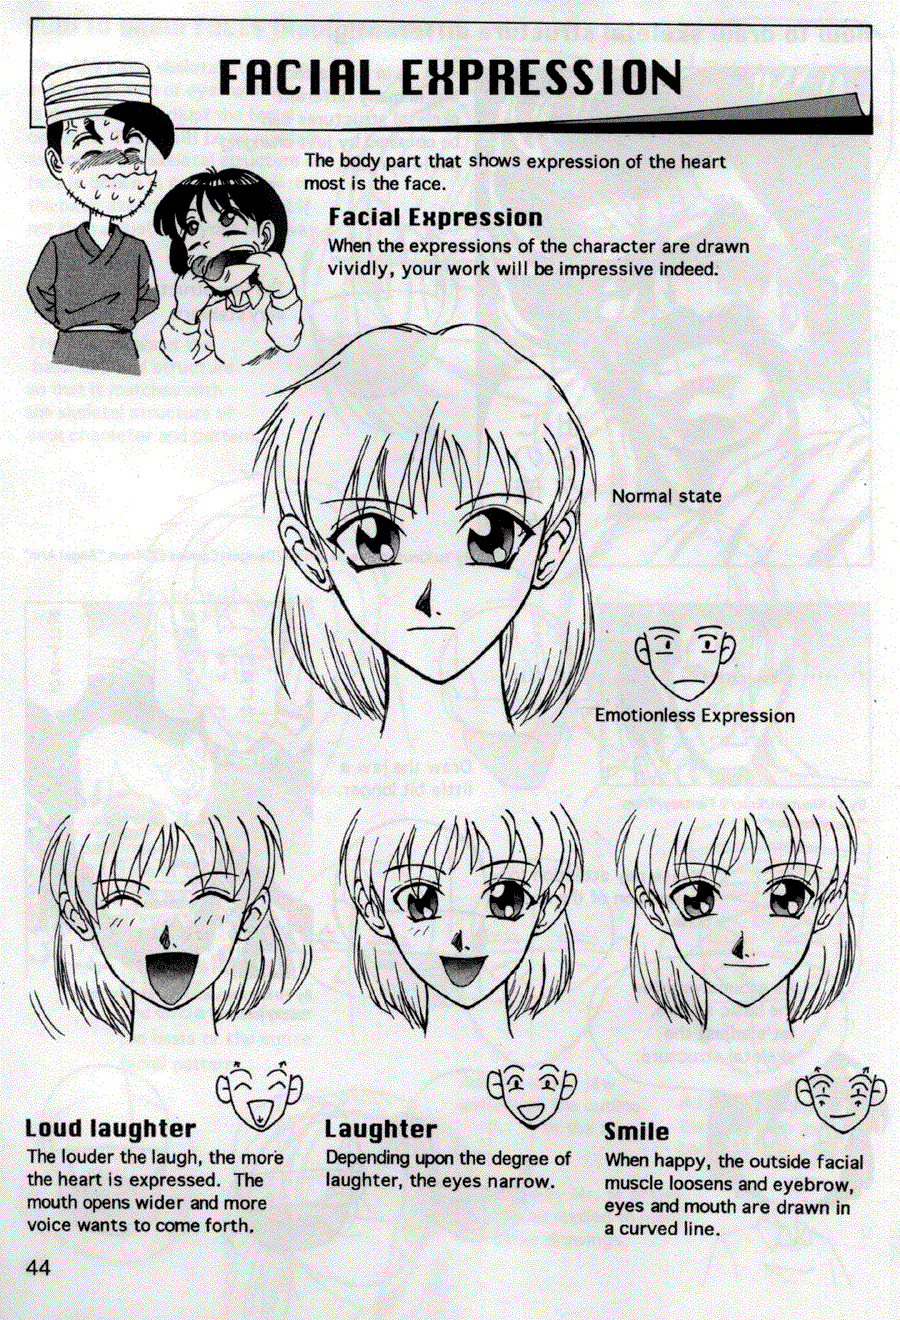 Now to draw Manga: Compiling Characters - Now to draw Manga ></a>
<script language=JavaScript> 
  var txt = 